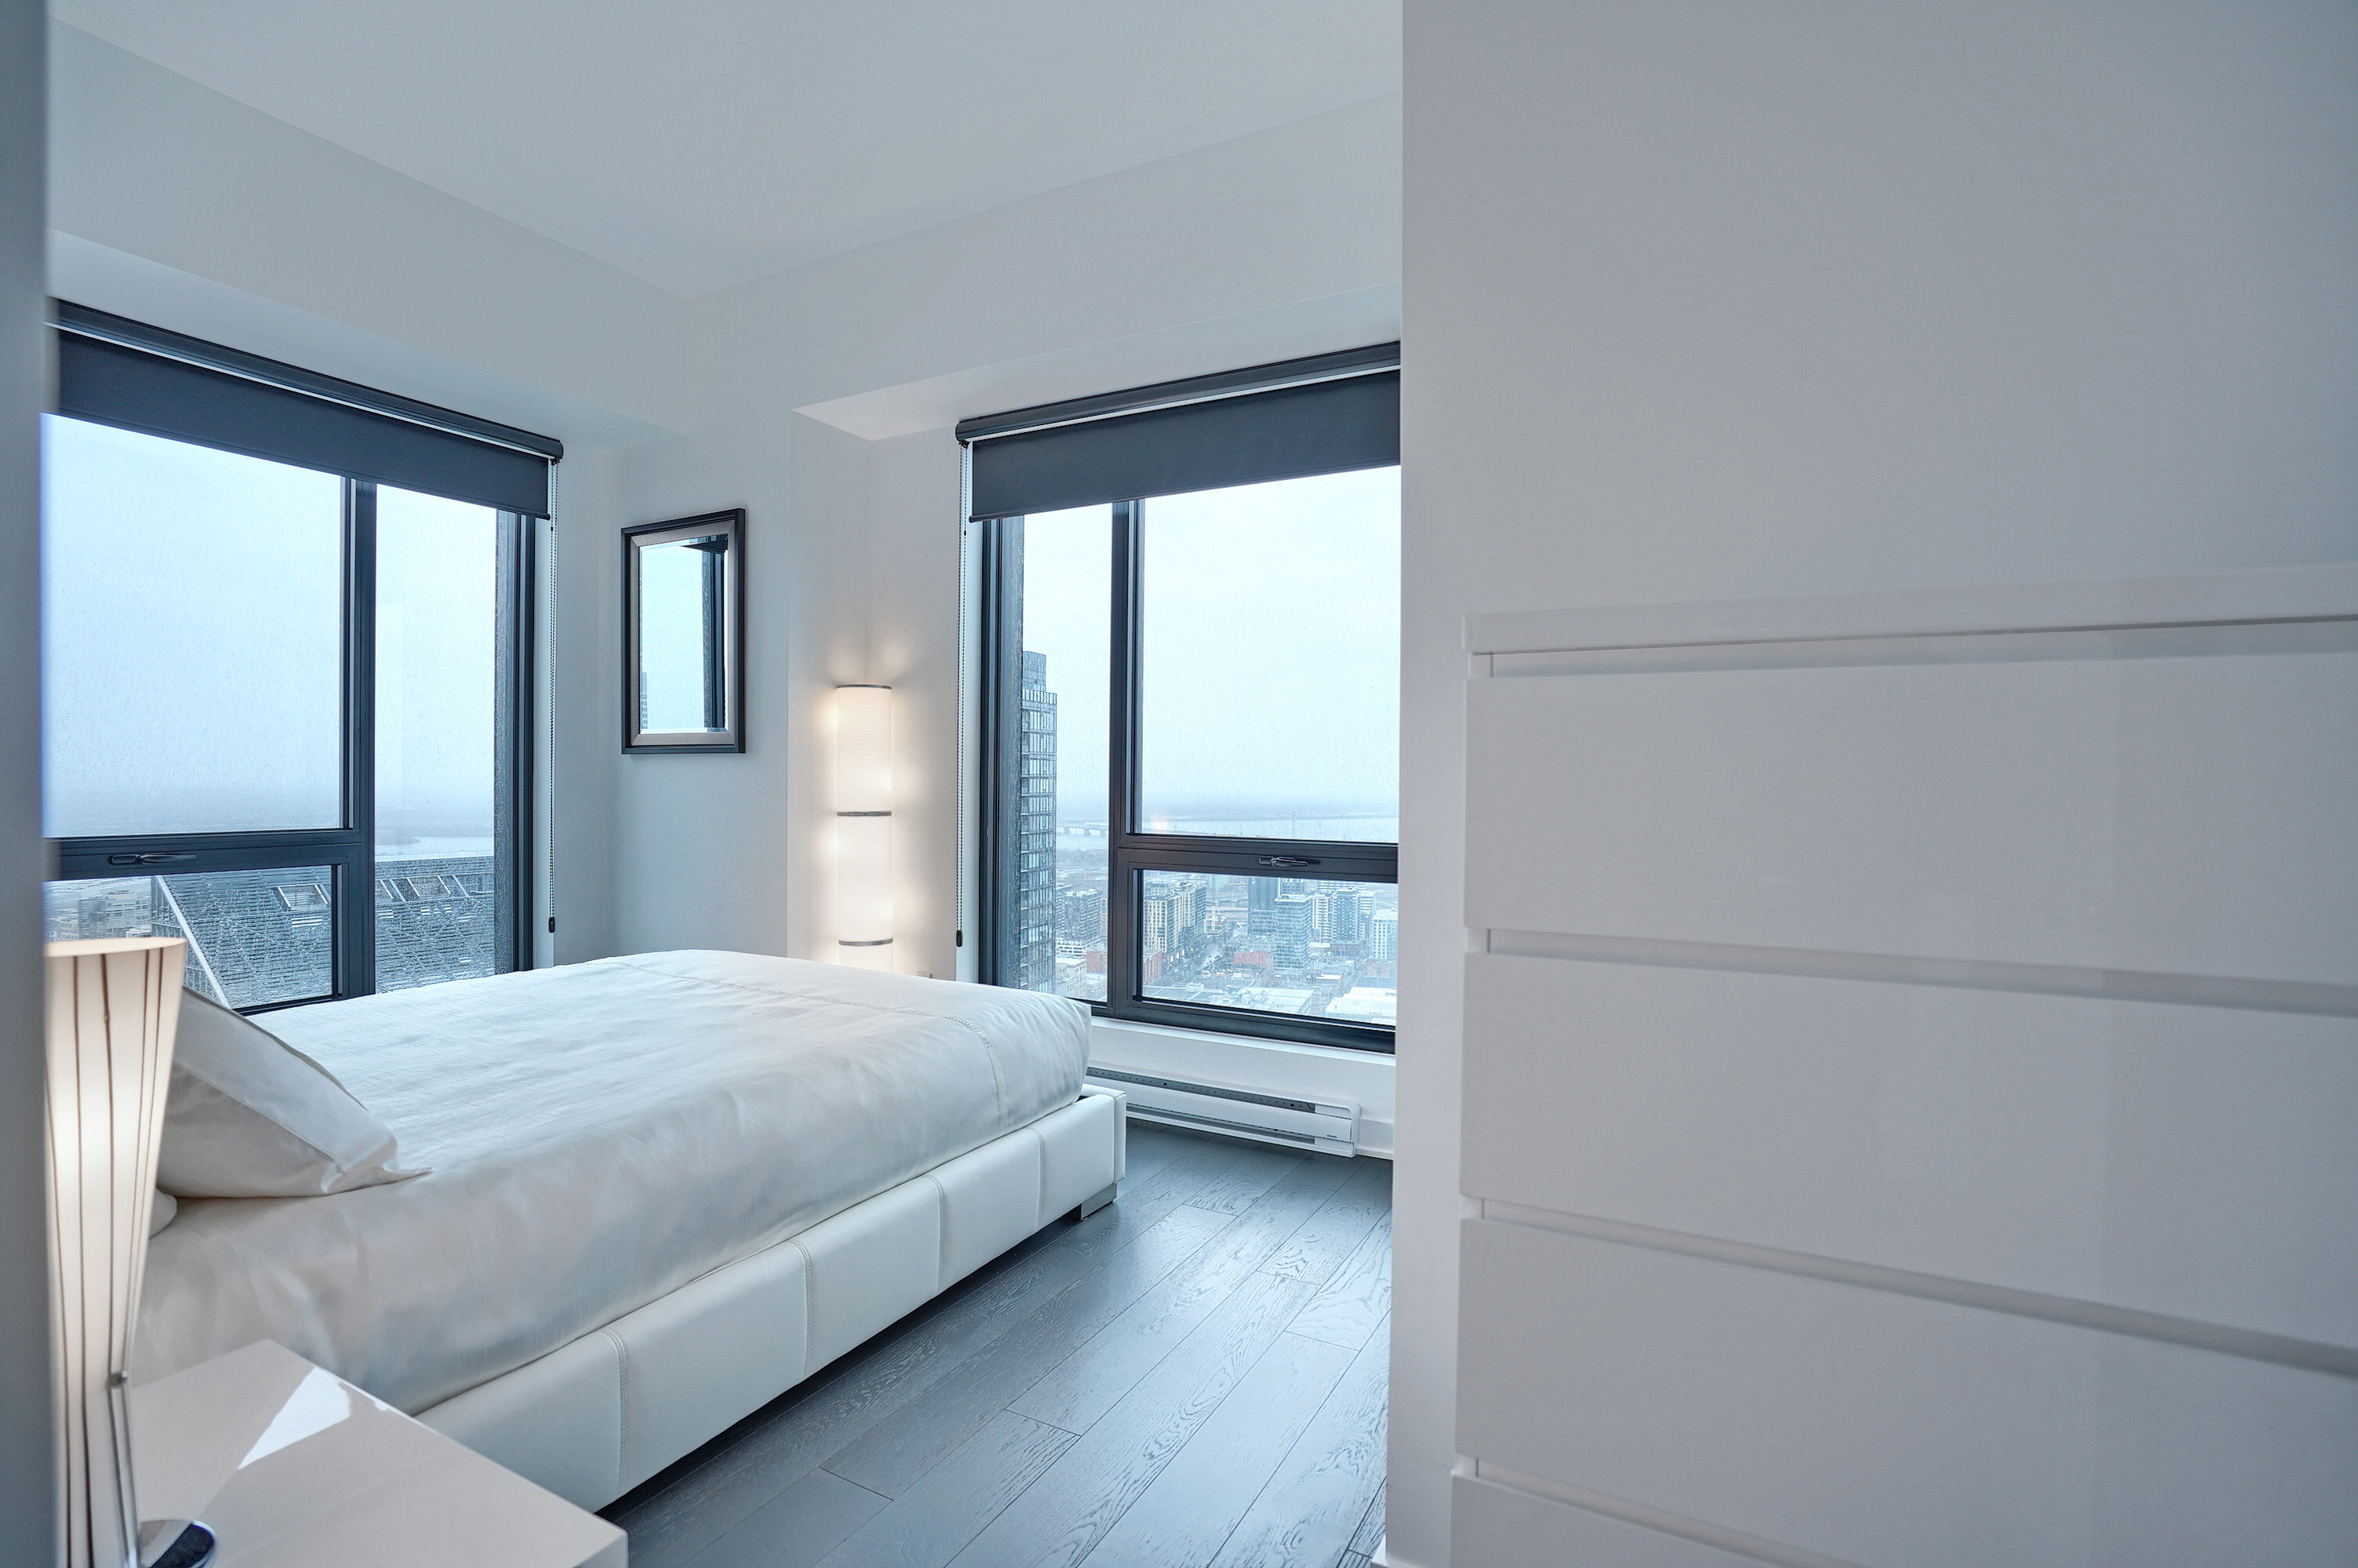 Angled view into the bedroom of this luxury furnished short term housing apartment in montreal. Light, plush bedding, light walls, darker gray wood flooring. Floor-to-ceiling window to brighten each morning